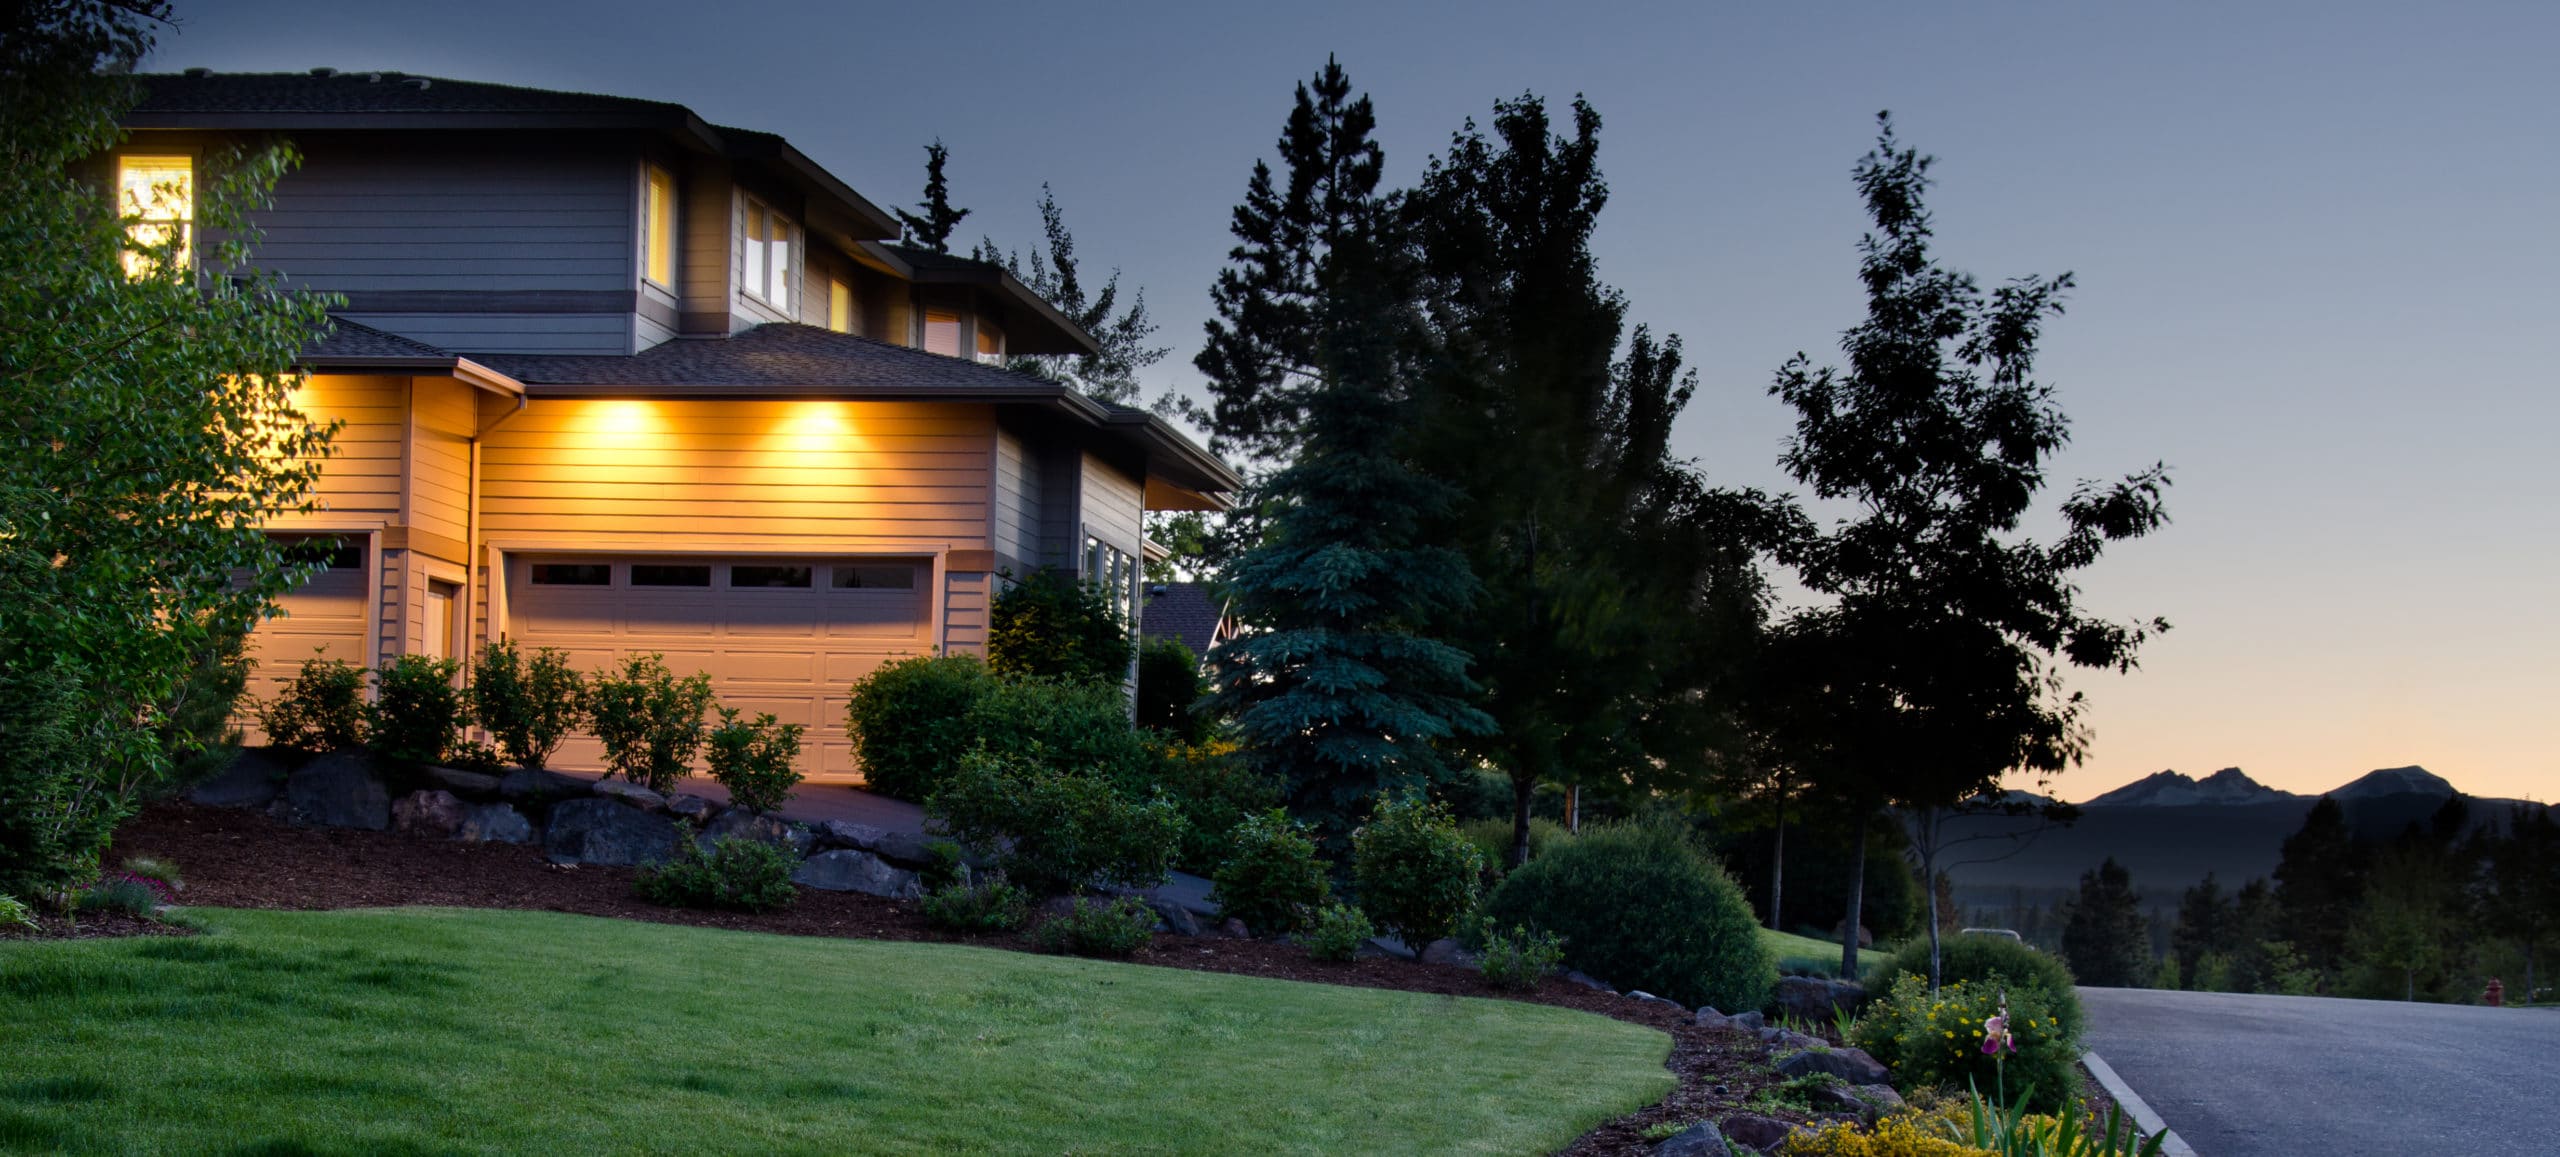 twilight exterior of home and lawn